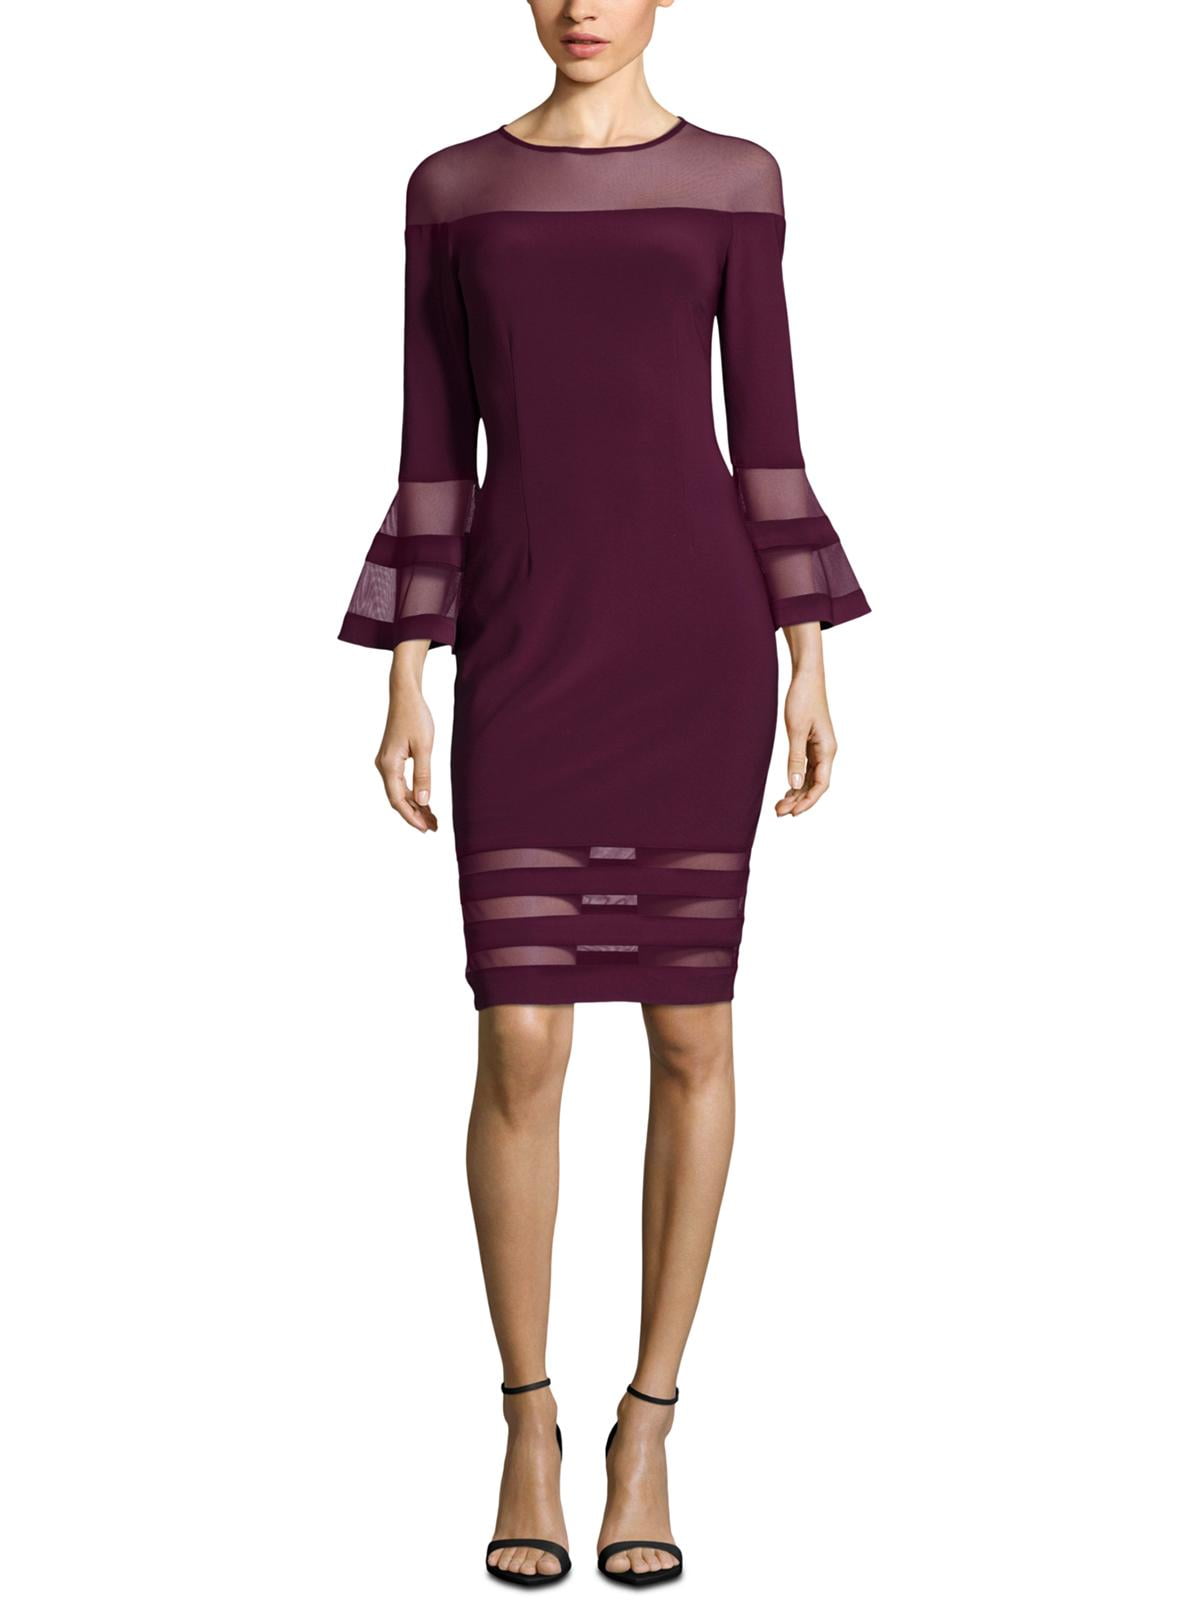 Betsy & Adam - Betsy & Adam Womens Illusion Bell Sleeves Cocktail Dress